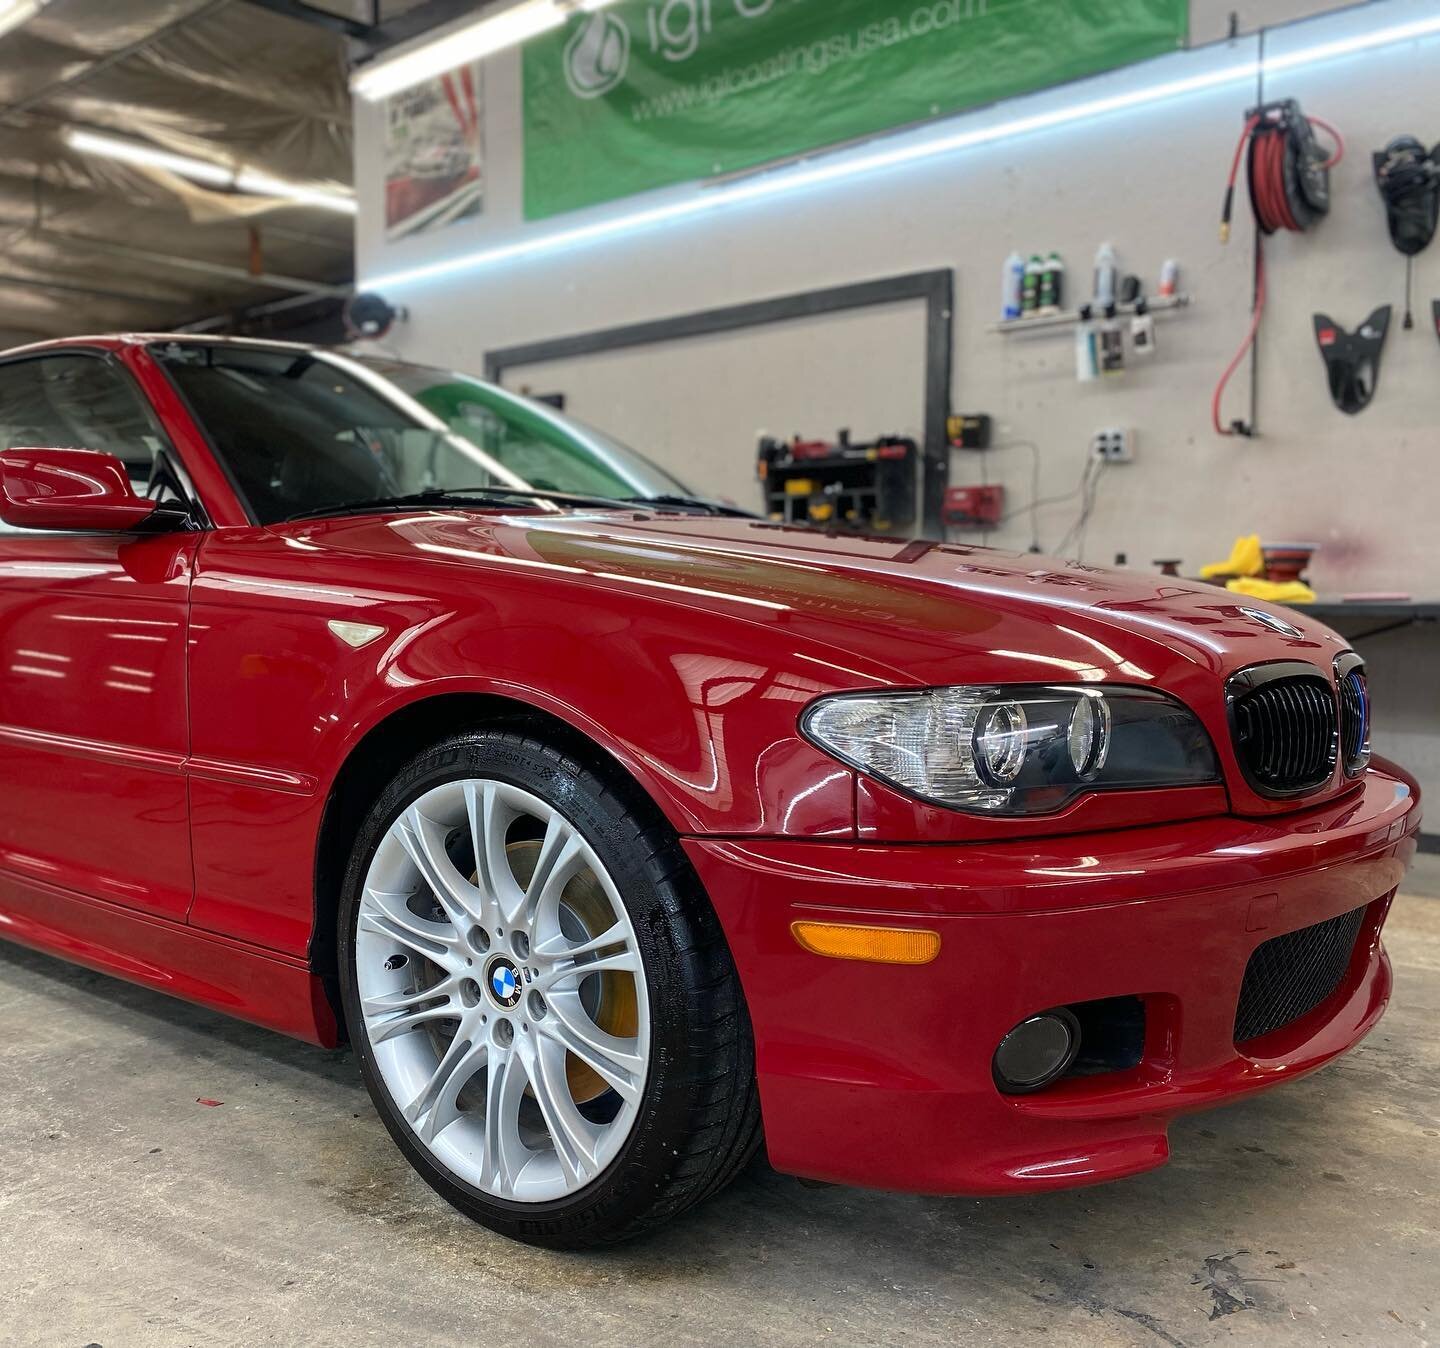 This 330ci ZHP came in after sitting for a long time with oxidized paint, buildup in the cracks, in dire need of a correction. We gave this an extensive cleaning as well as our Level 2 polishing service and it now has a new lease on life. 💎 
Reach o